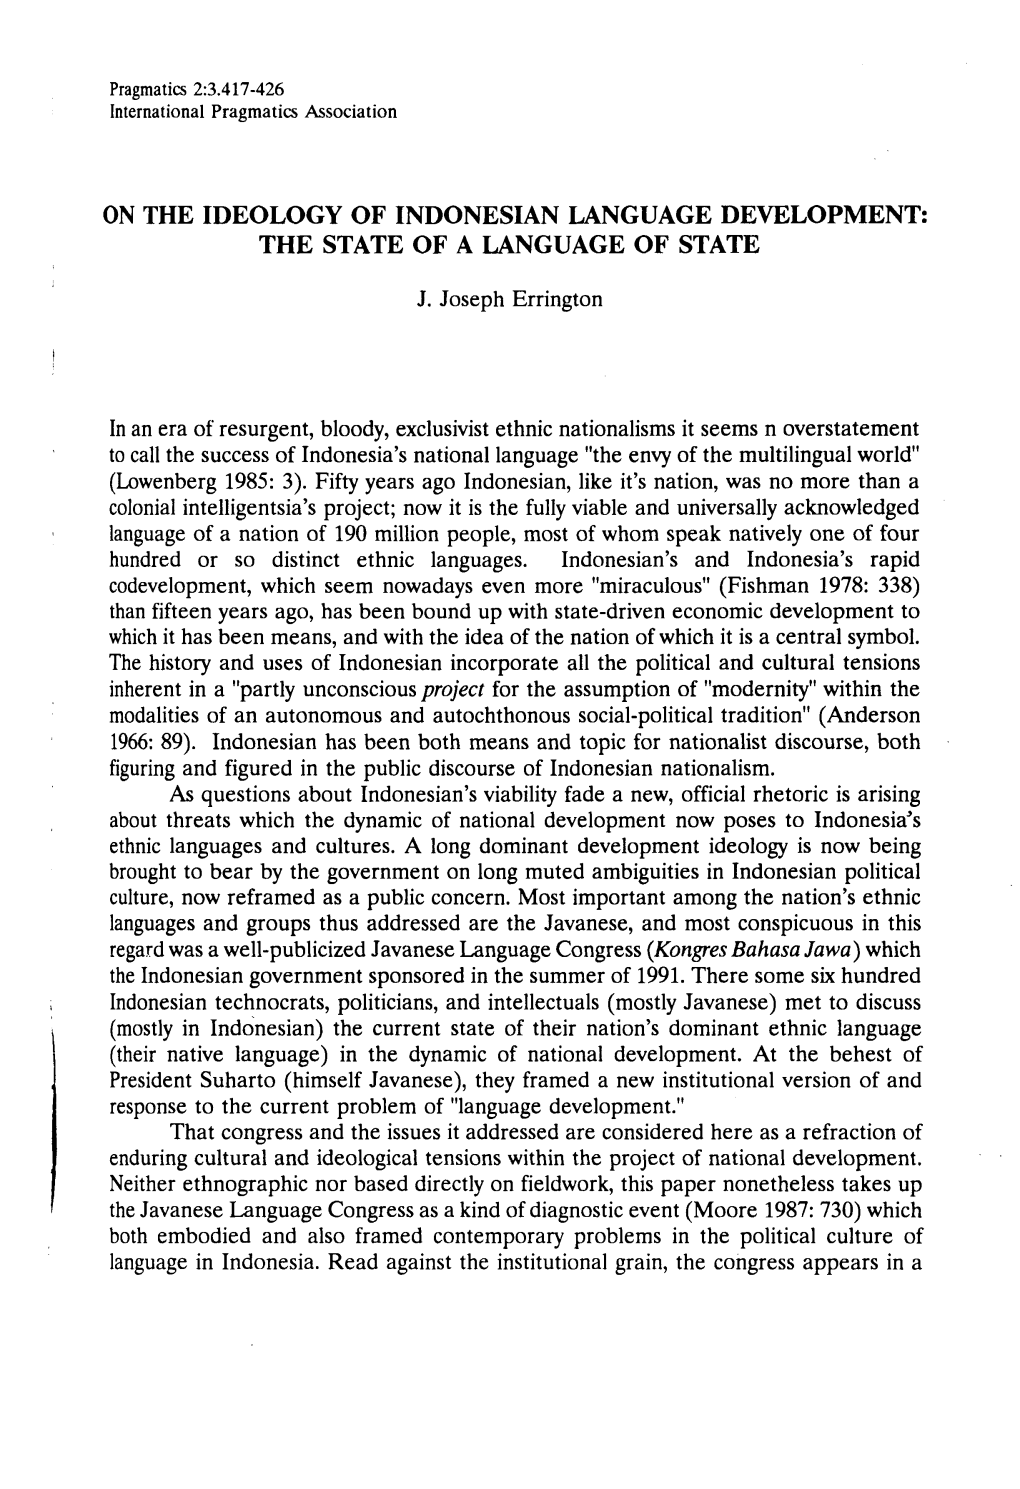 On the Ideology of Indonesian I,Anguage Deyelopment: the State of a Language of State